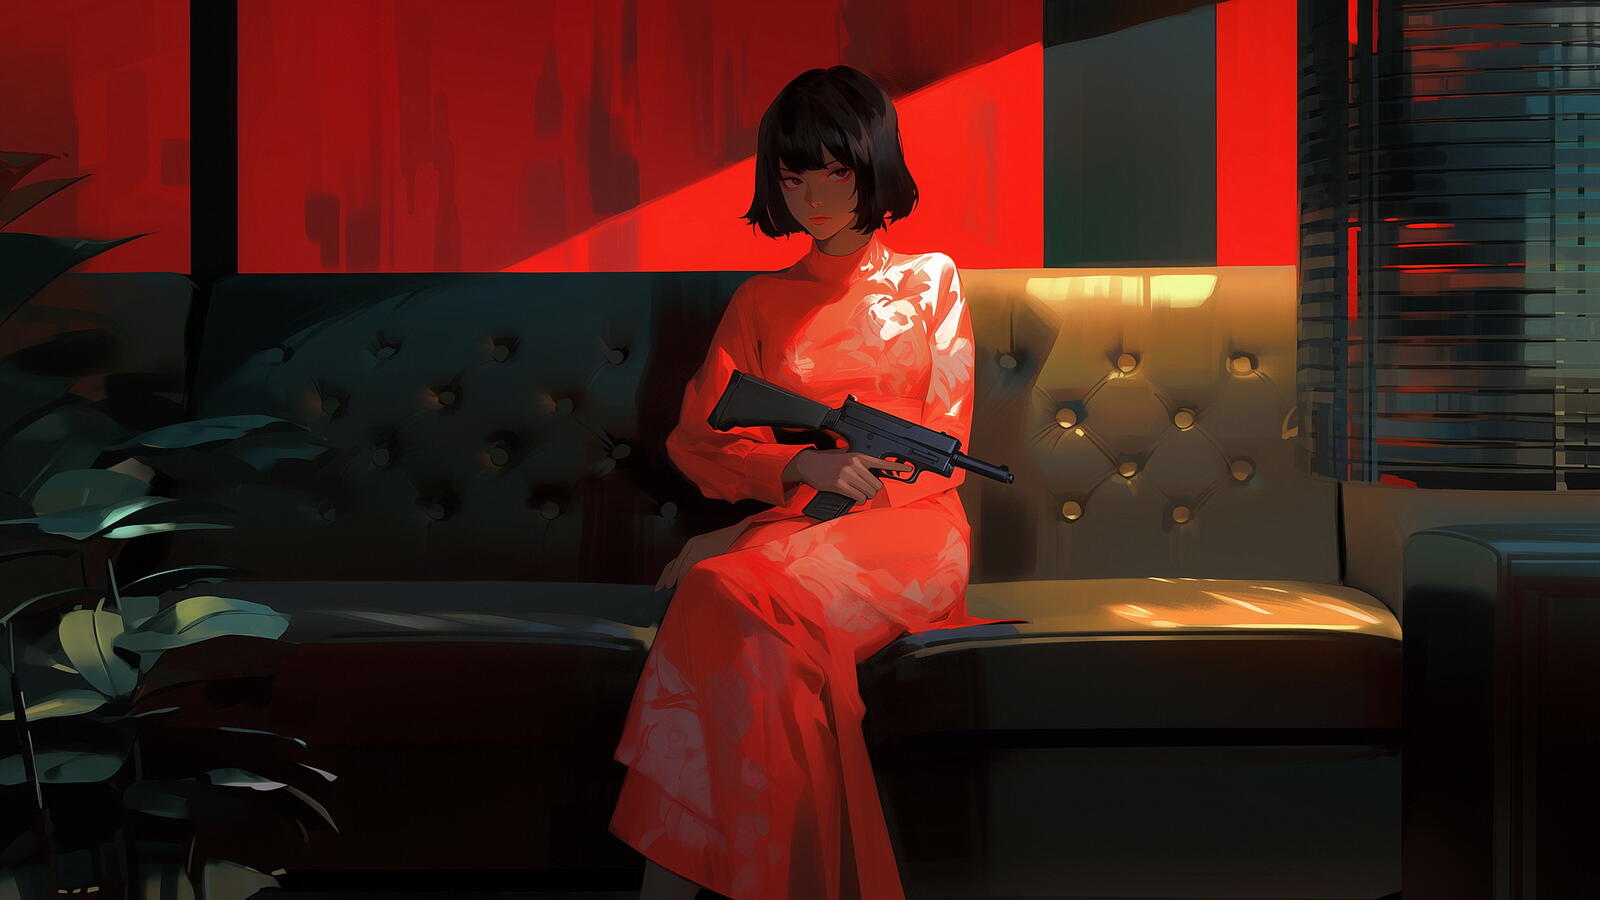 Free photo Drawing of a brunette girl with a machine gun in her hands sitting on a couch.